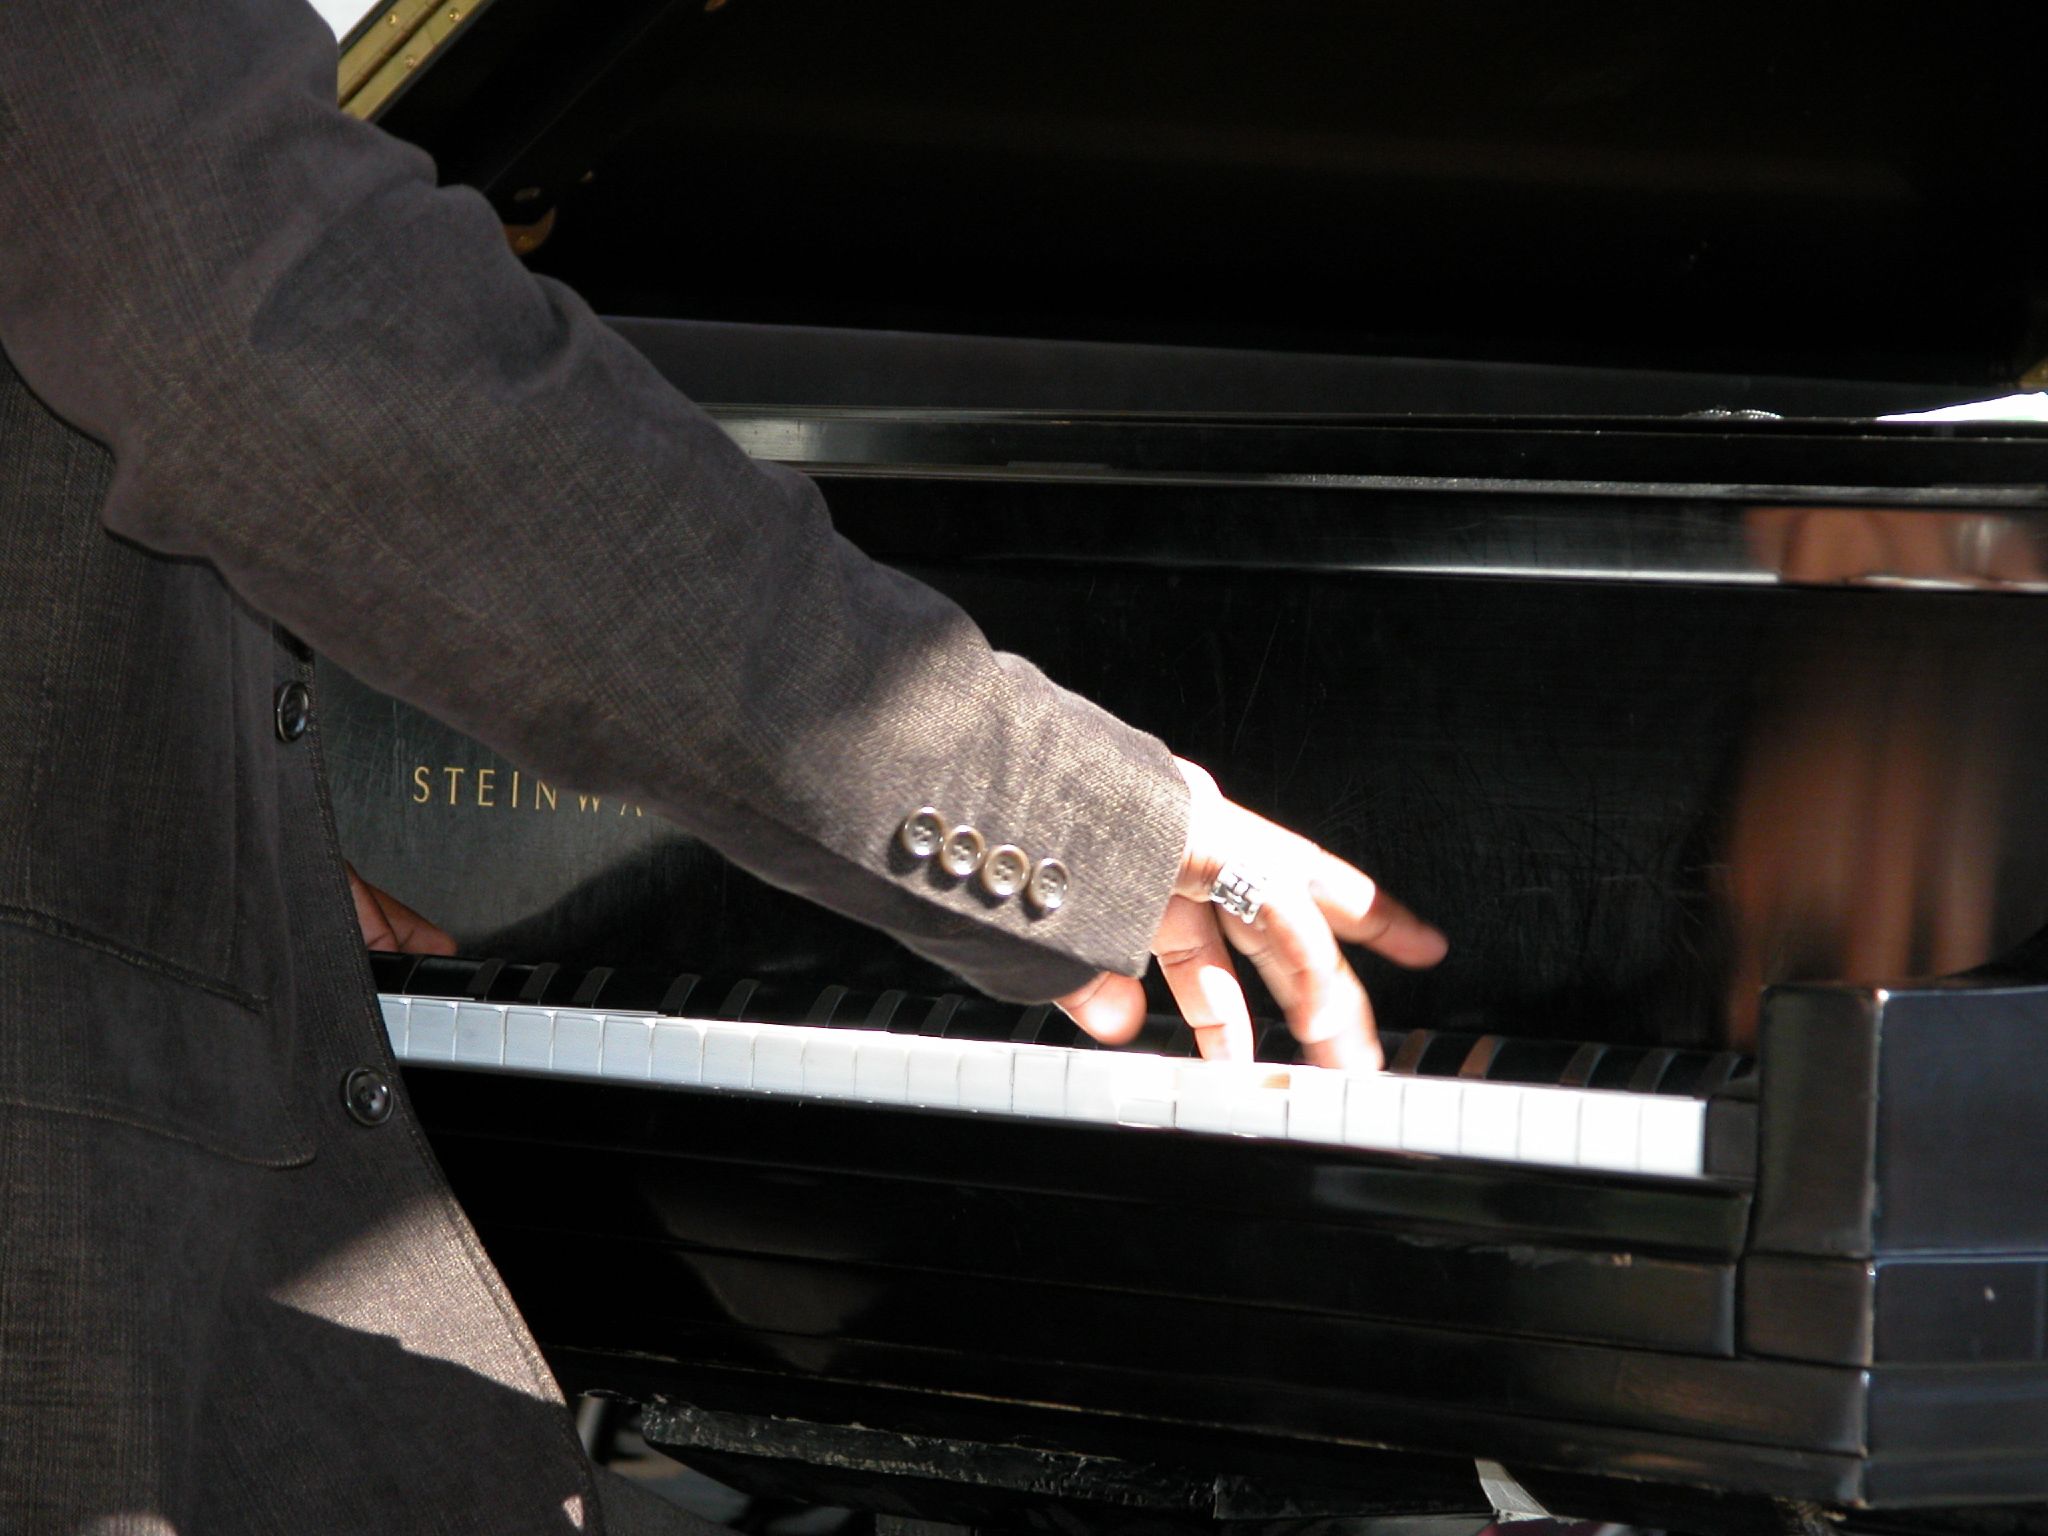 a man reaching into the piano to learn soing